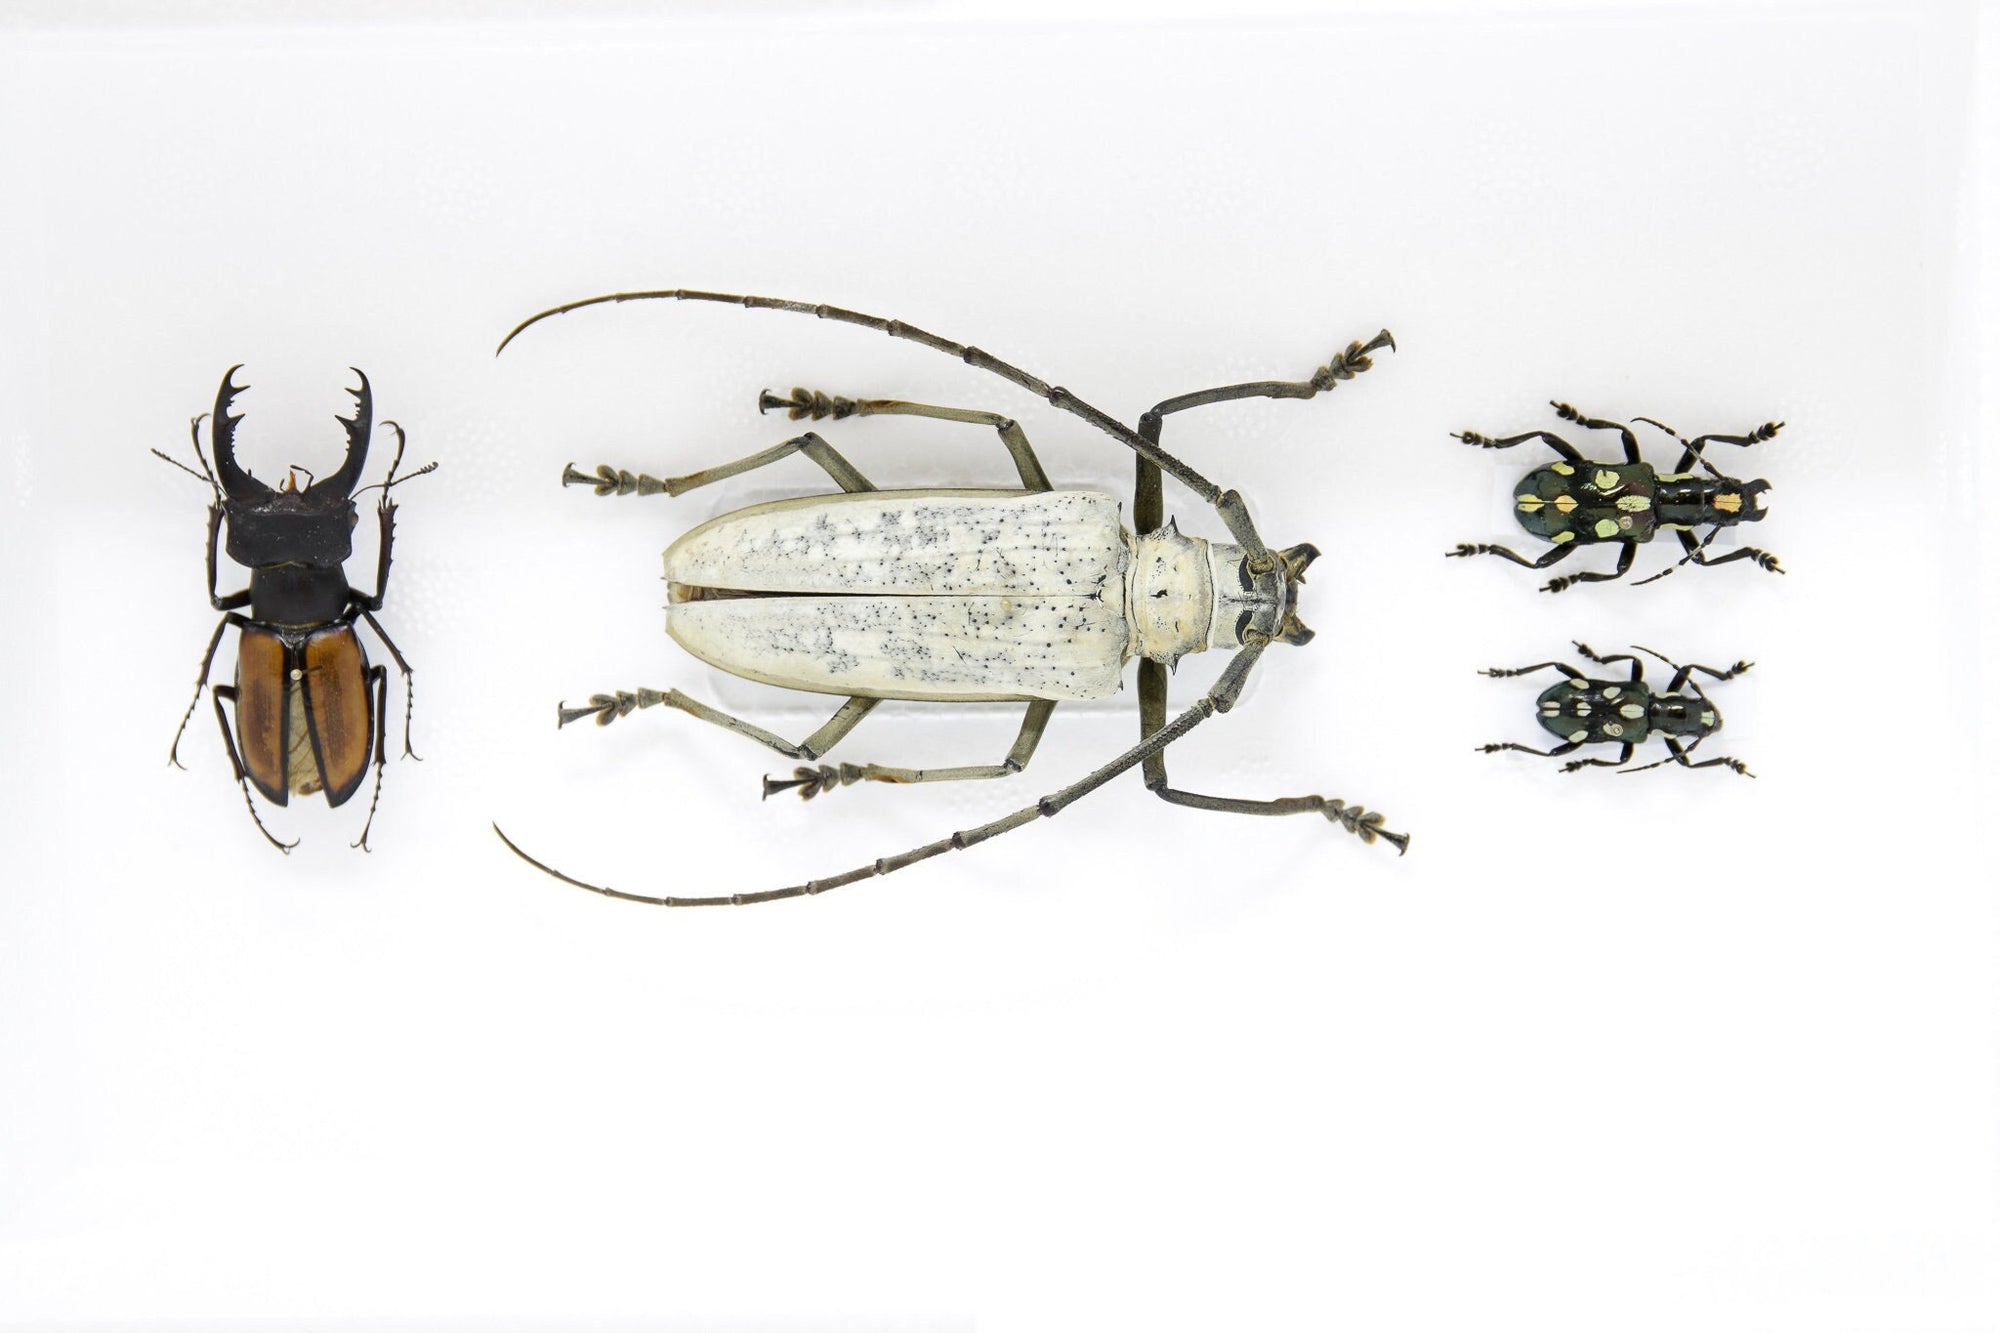 A Collection of Real Longhorned Beetles (Coleoptera) inc. Scientific Collection Data, A1 Quality, Entomology, Real Insect Specimens #SE41